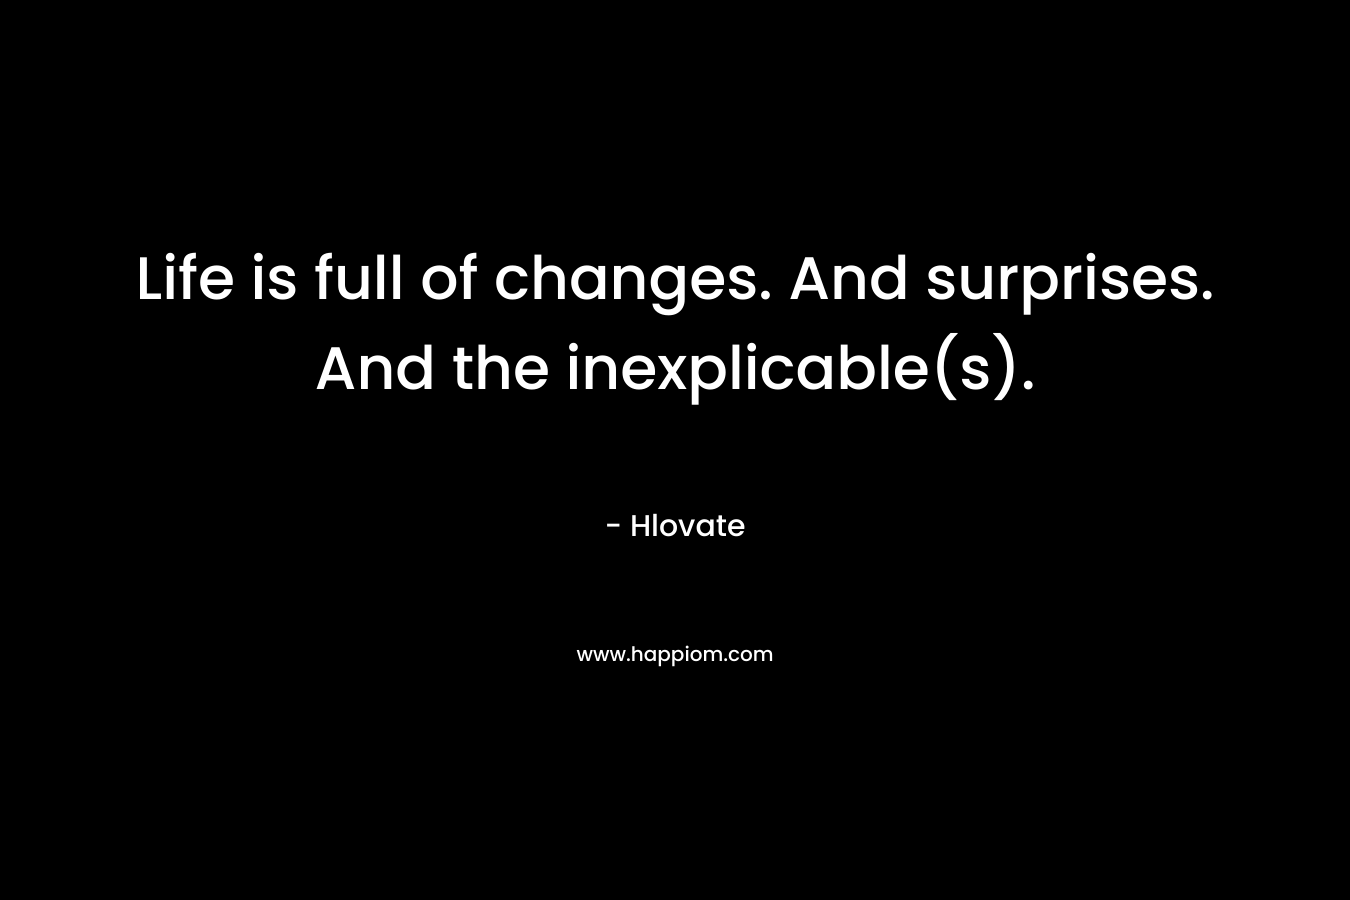 Life is full of changes. And surprises. And the inexplicable(s). – Hlovate